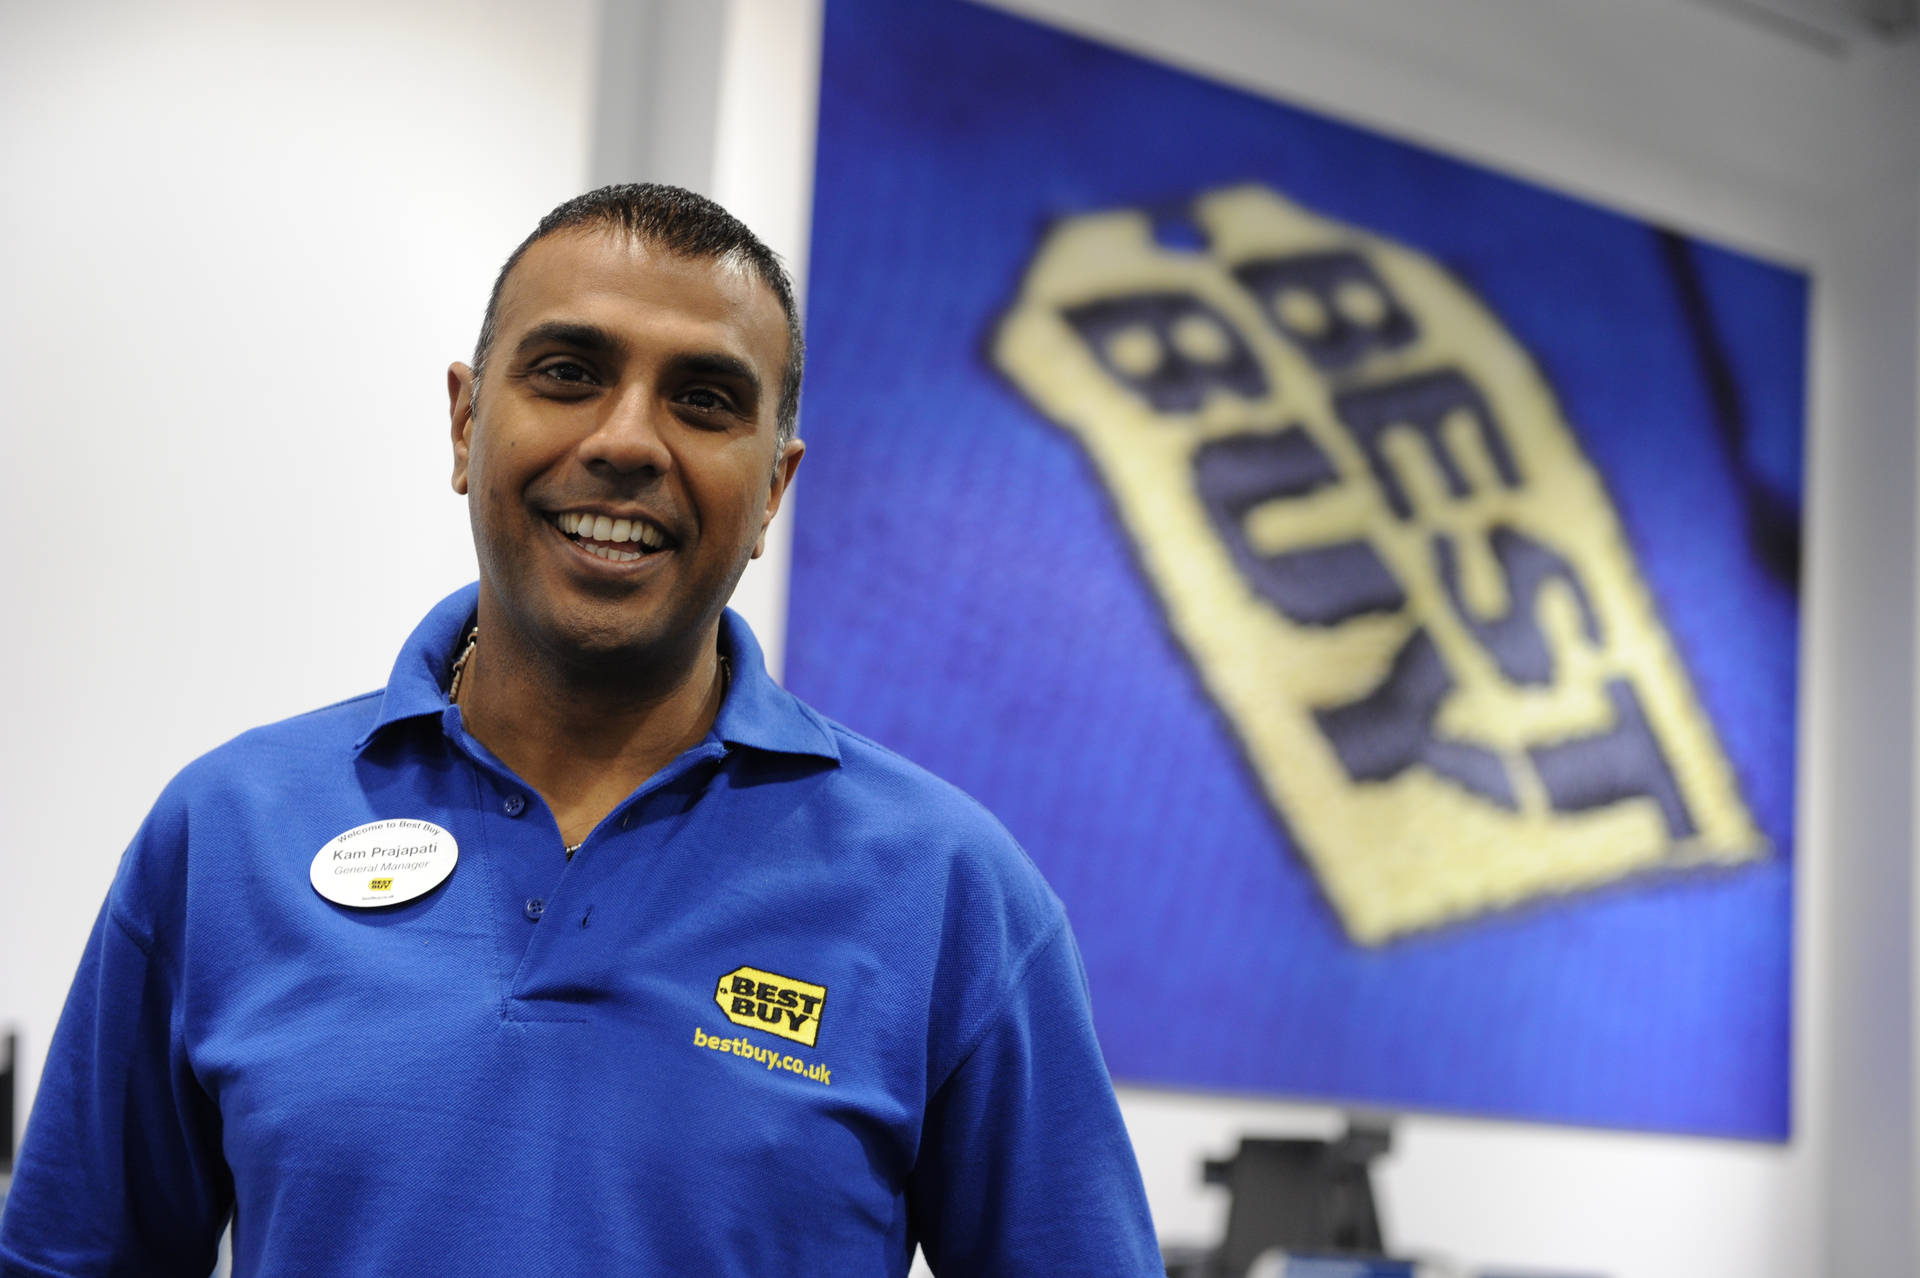 Enthusiastic Best Buy Employee Ready to Assist Customers Wallpaper